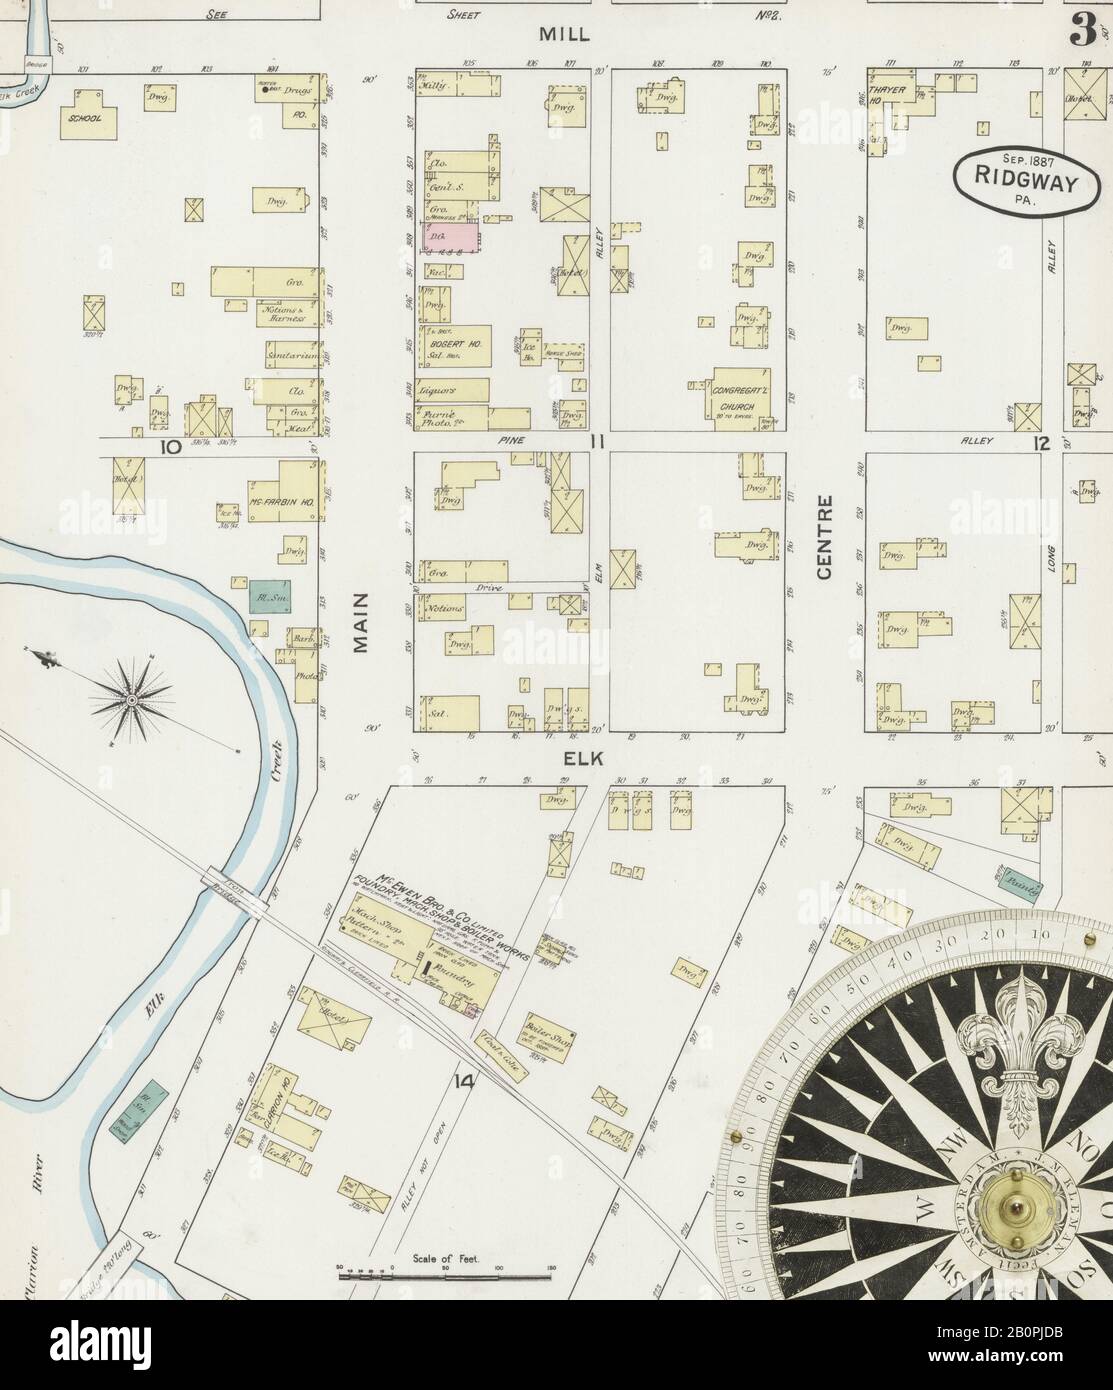 Image 3 of Sanborn Fire Insurance Map from Ridgway, Elk County, Pennsylvania. Sep 1887. 5 Sheet(s), America, street map with a Nineteenth Century compass Stock Photo